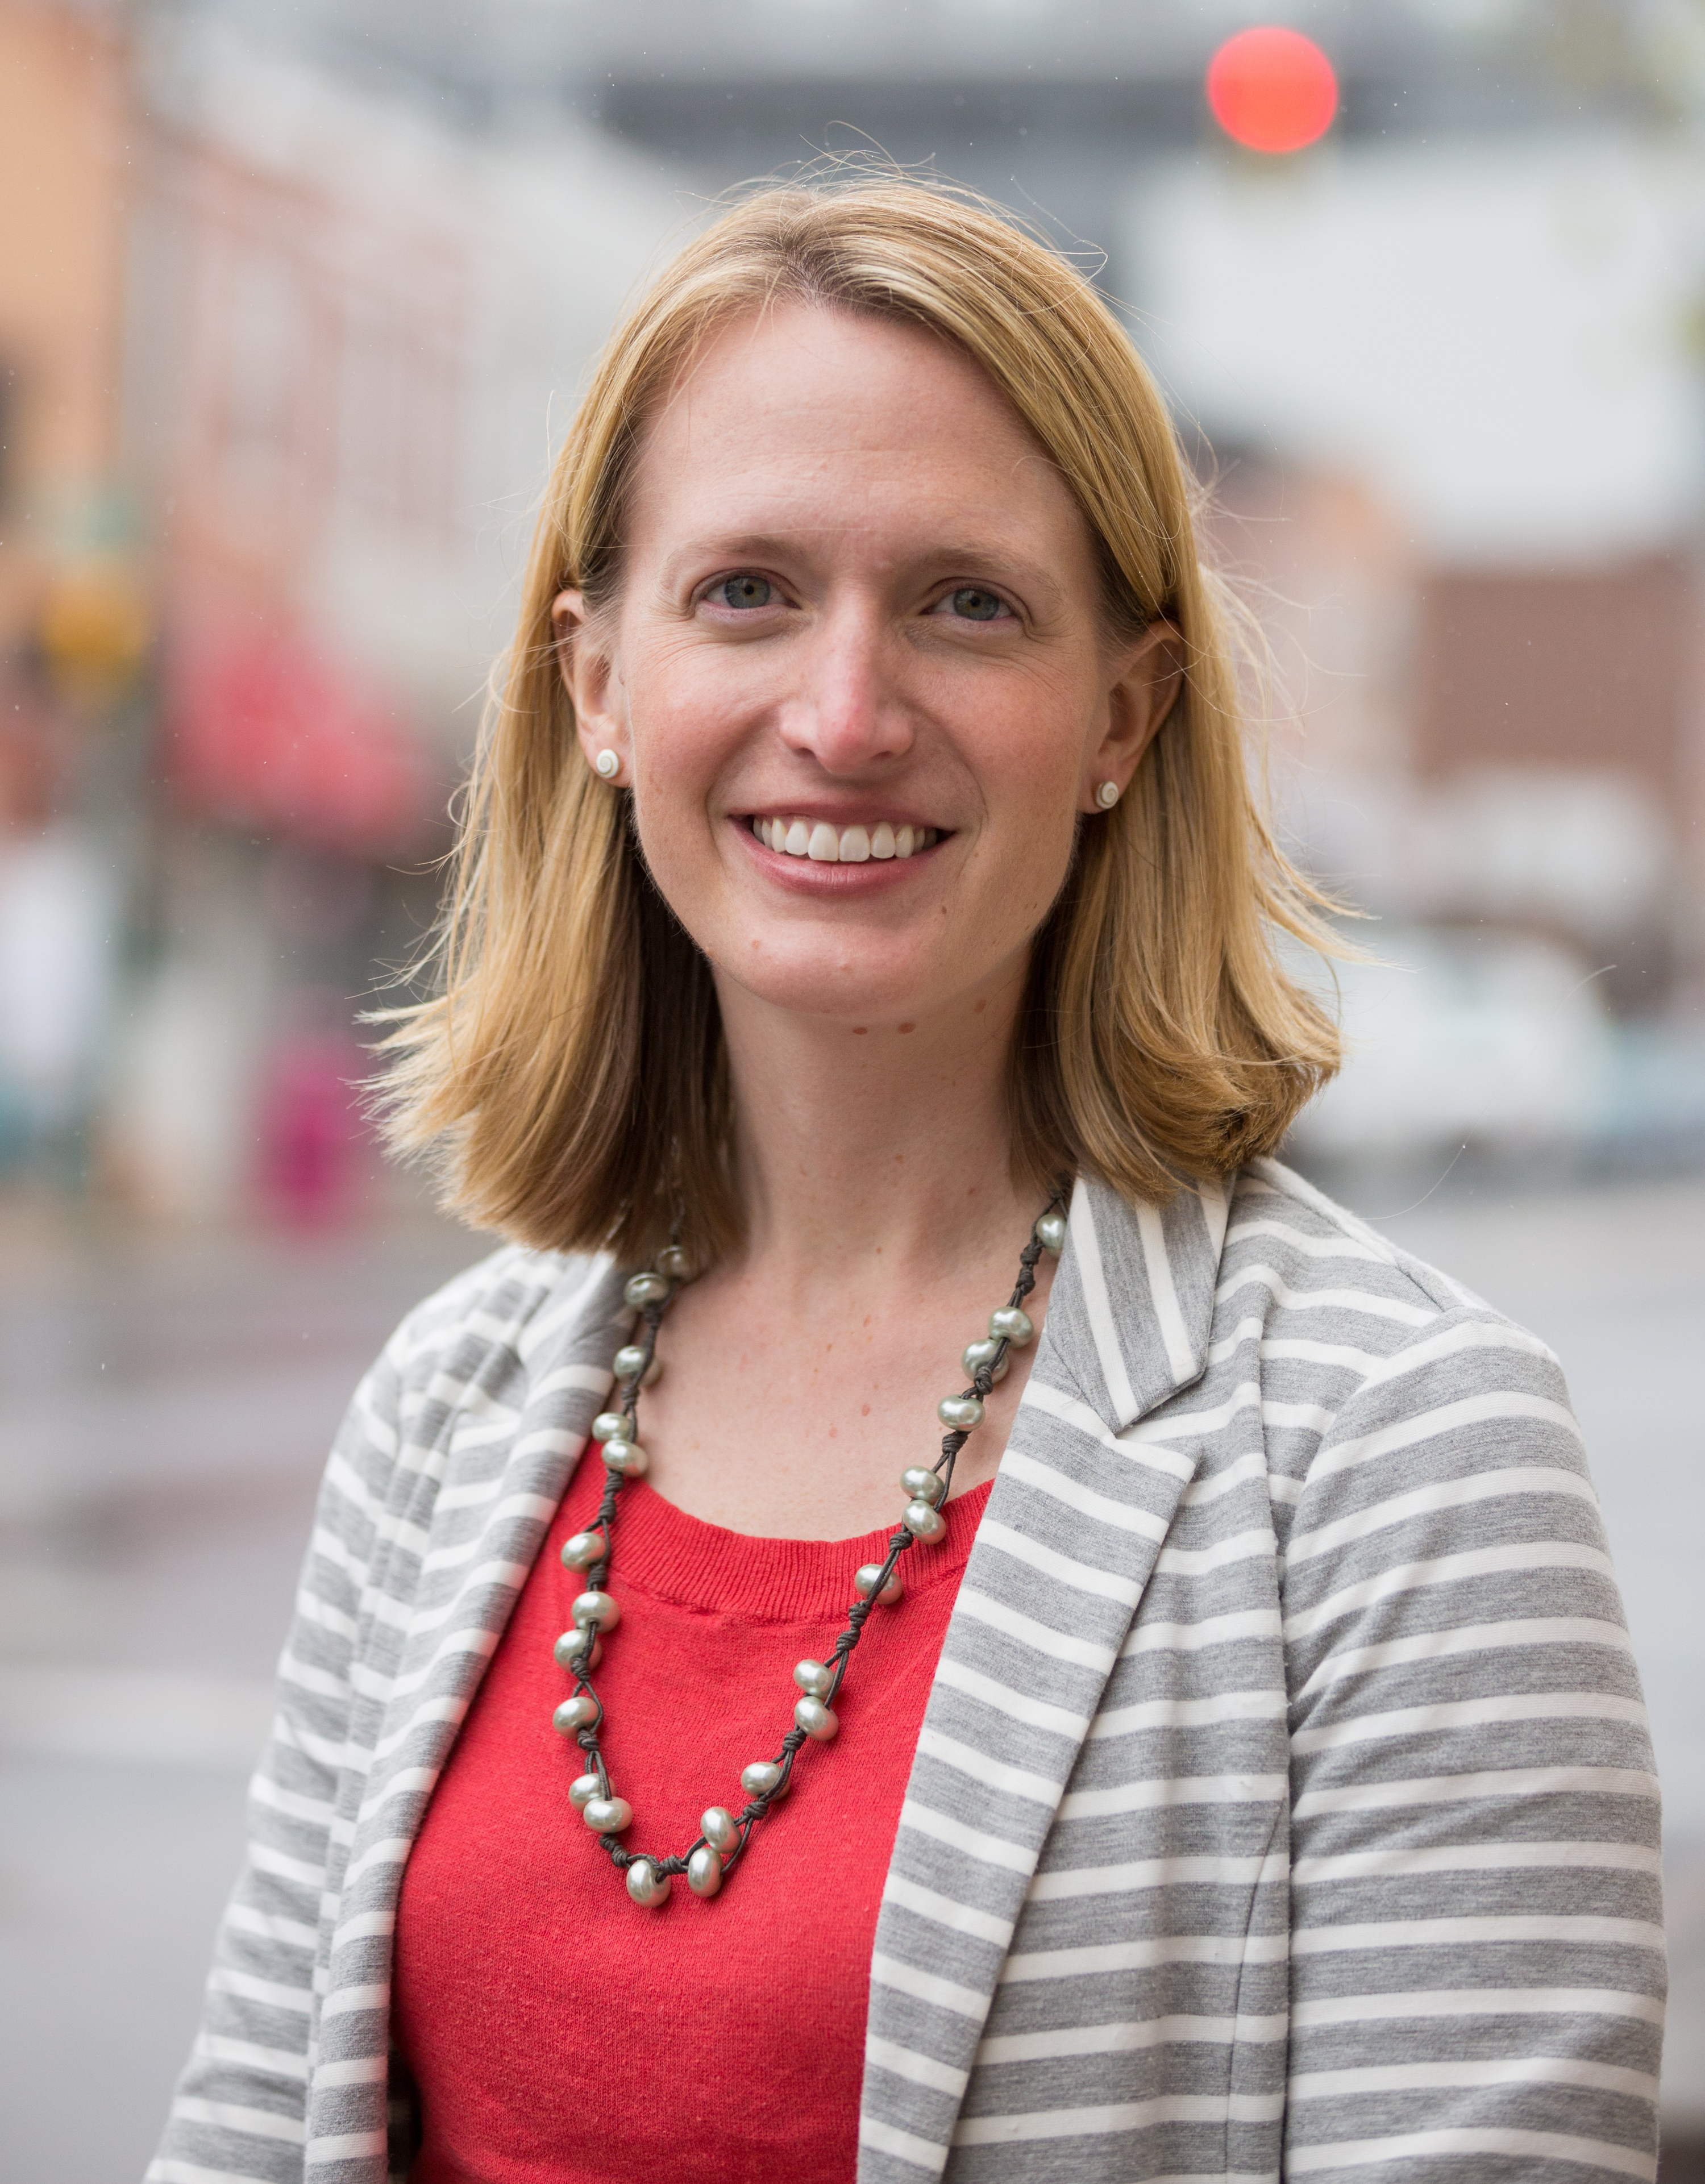 Del. Brooke Lierman on her run for Maryland Comptroller